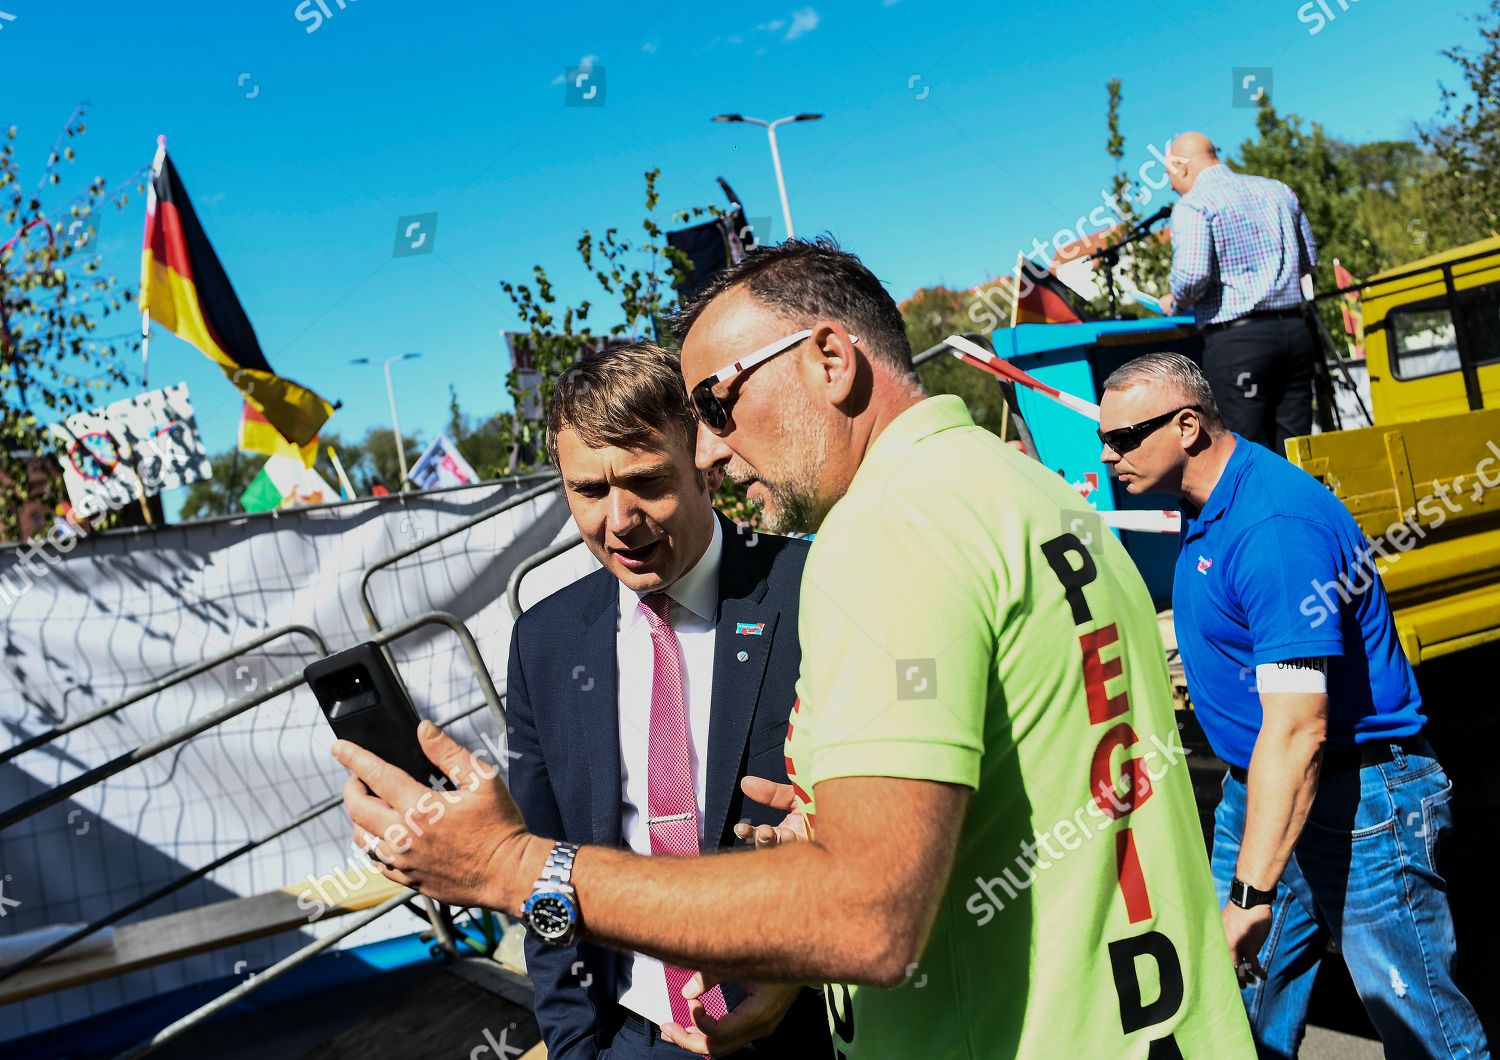 Afd Supporters Attend Rally Rightwing Alternative Fuer Editorial Stock Photo Stock Image Shutterstock